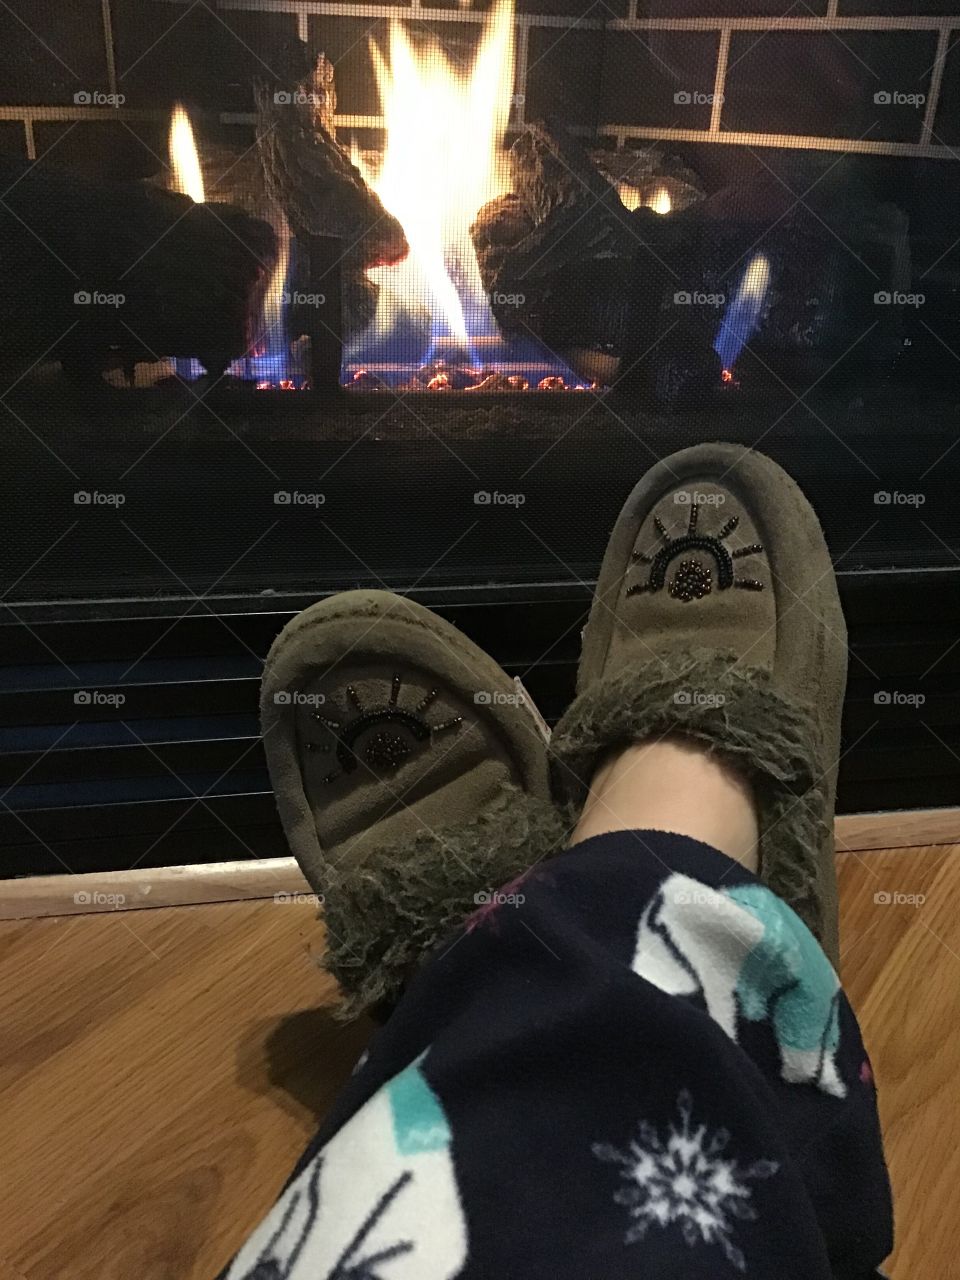 Relaxing by the fire